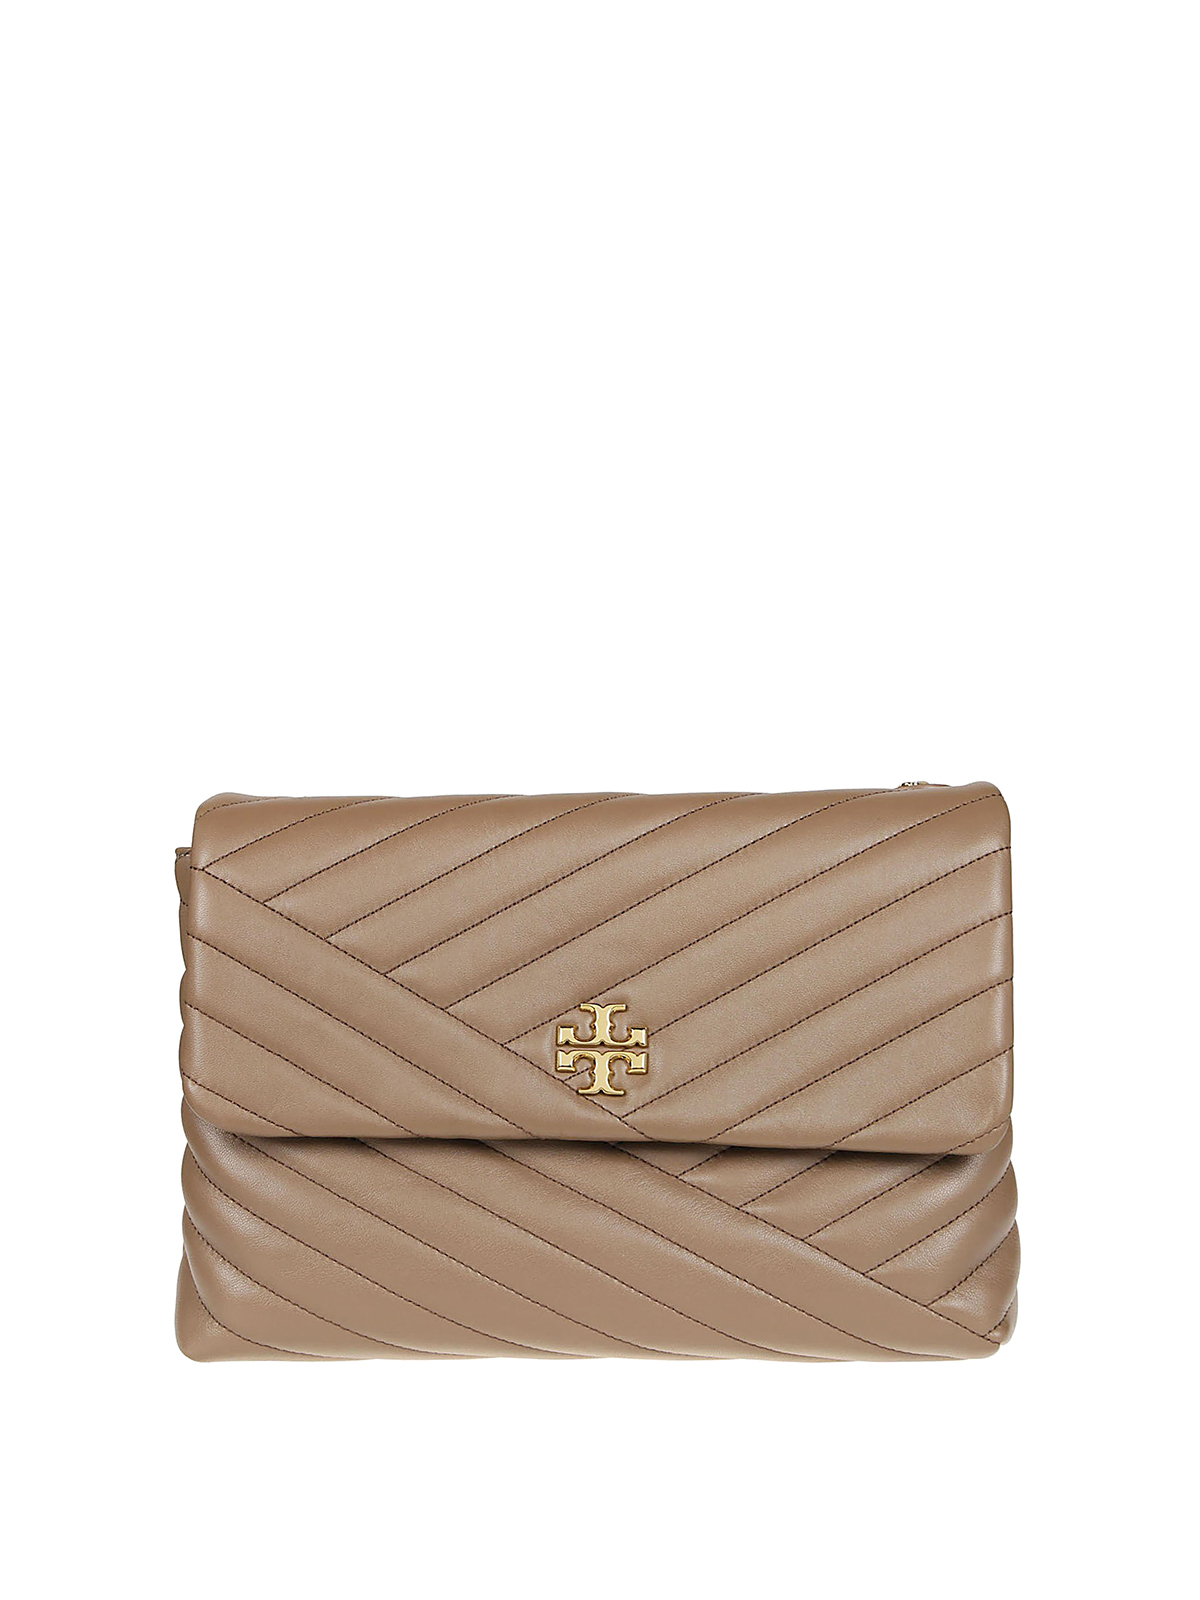 Tory Burch Kira Chevron-Quilted Leather Tote Bag